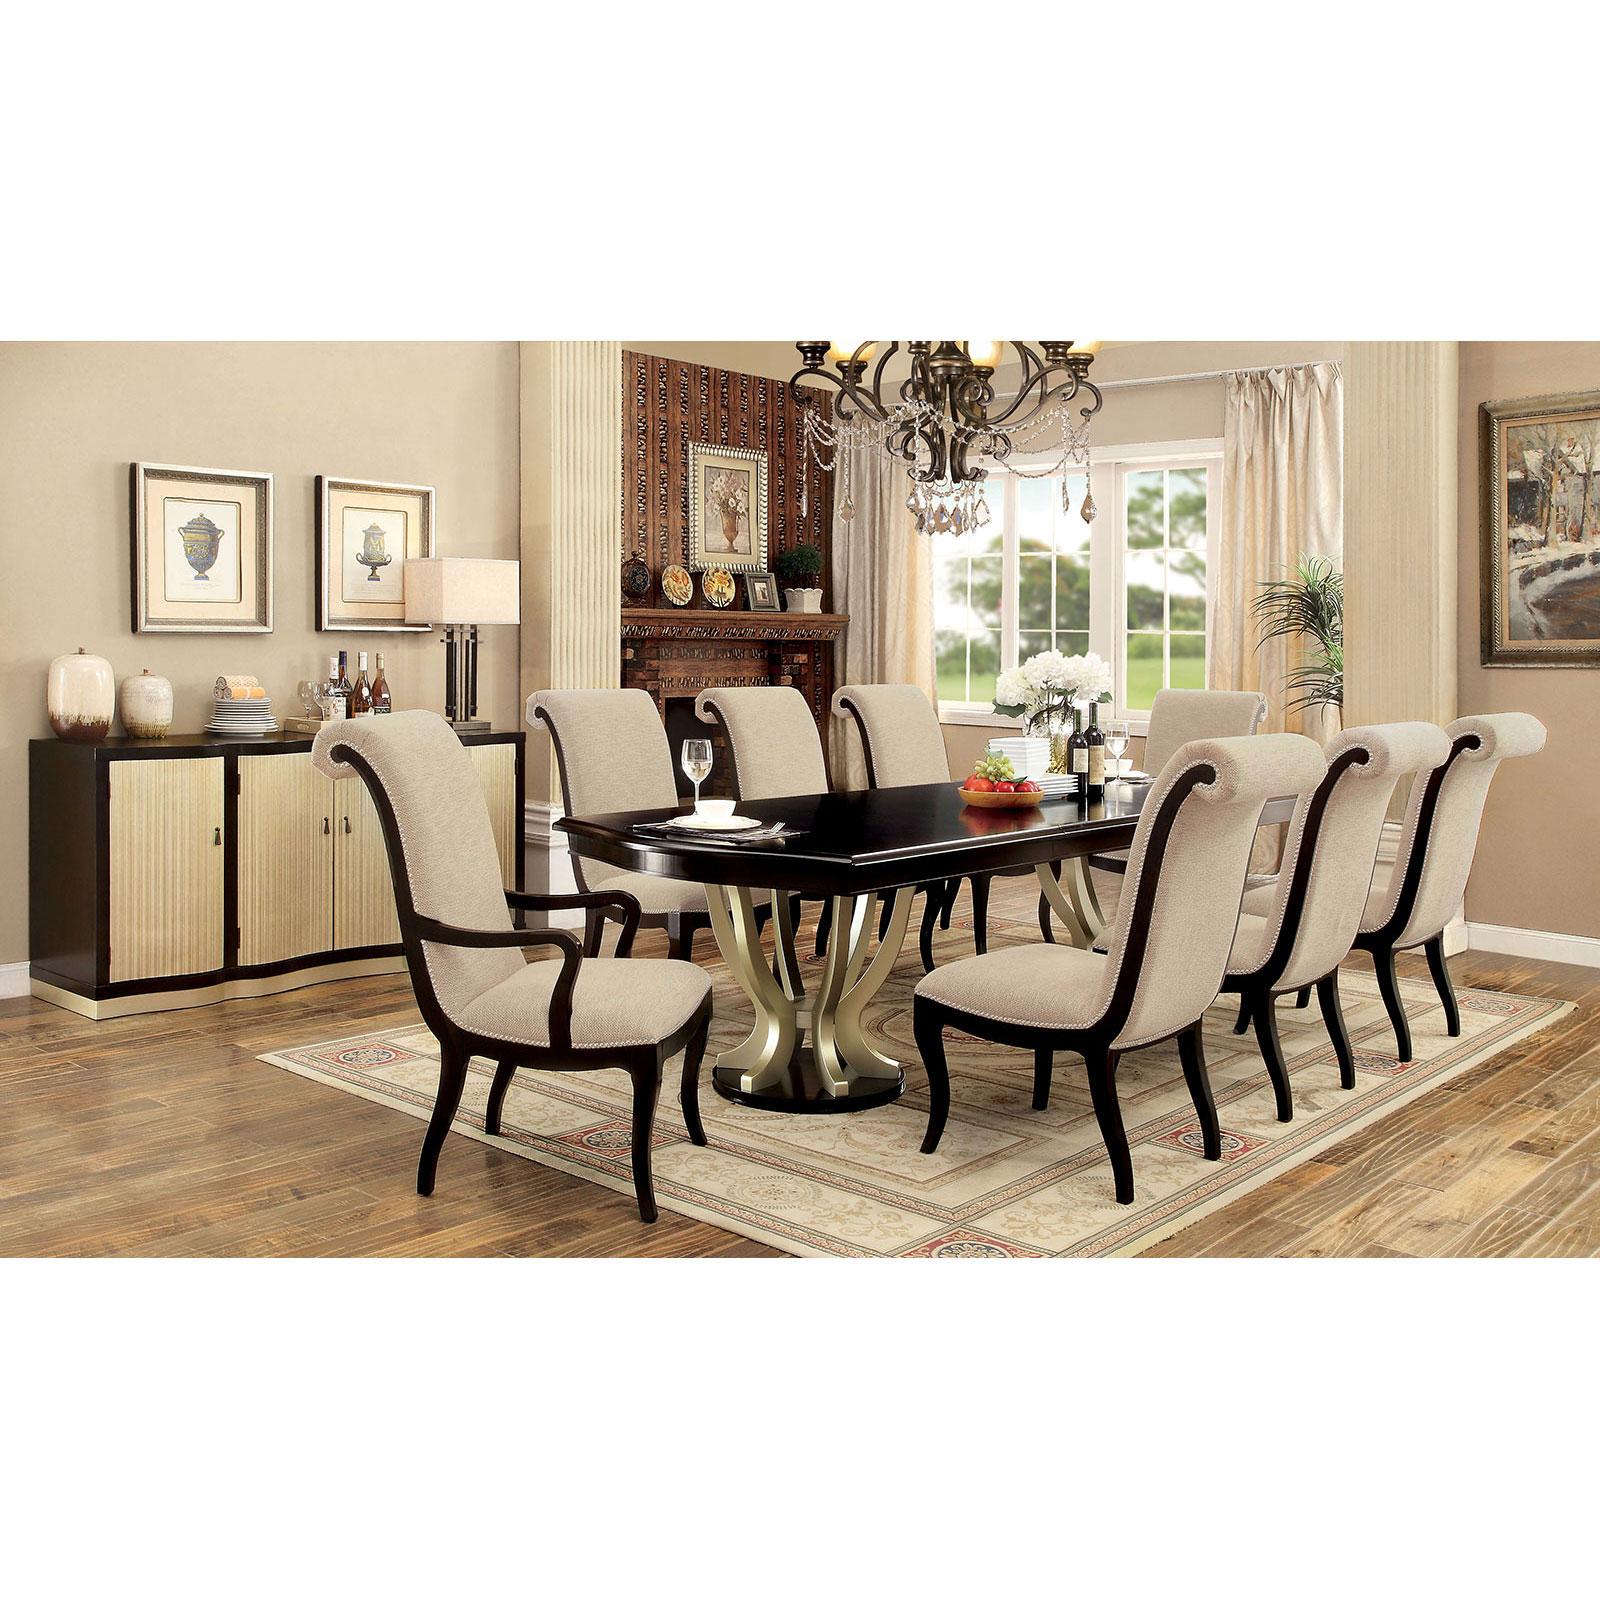 Transitional Dining Table ORNETTE CM3353T CM3353T in Espresso 